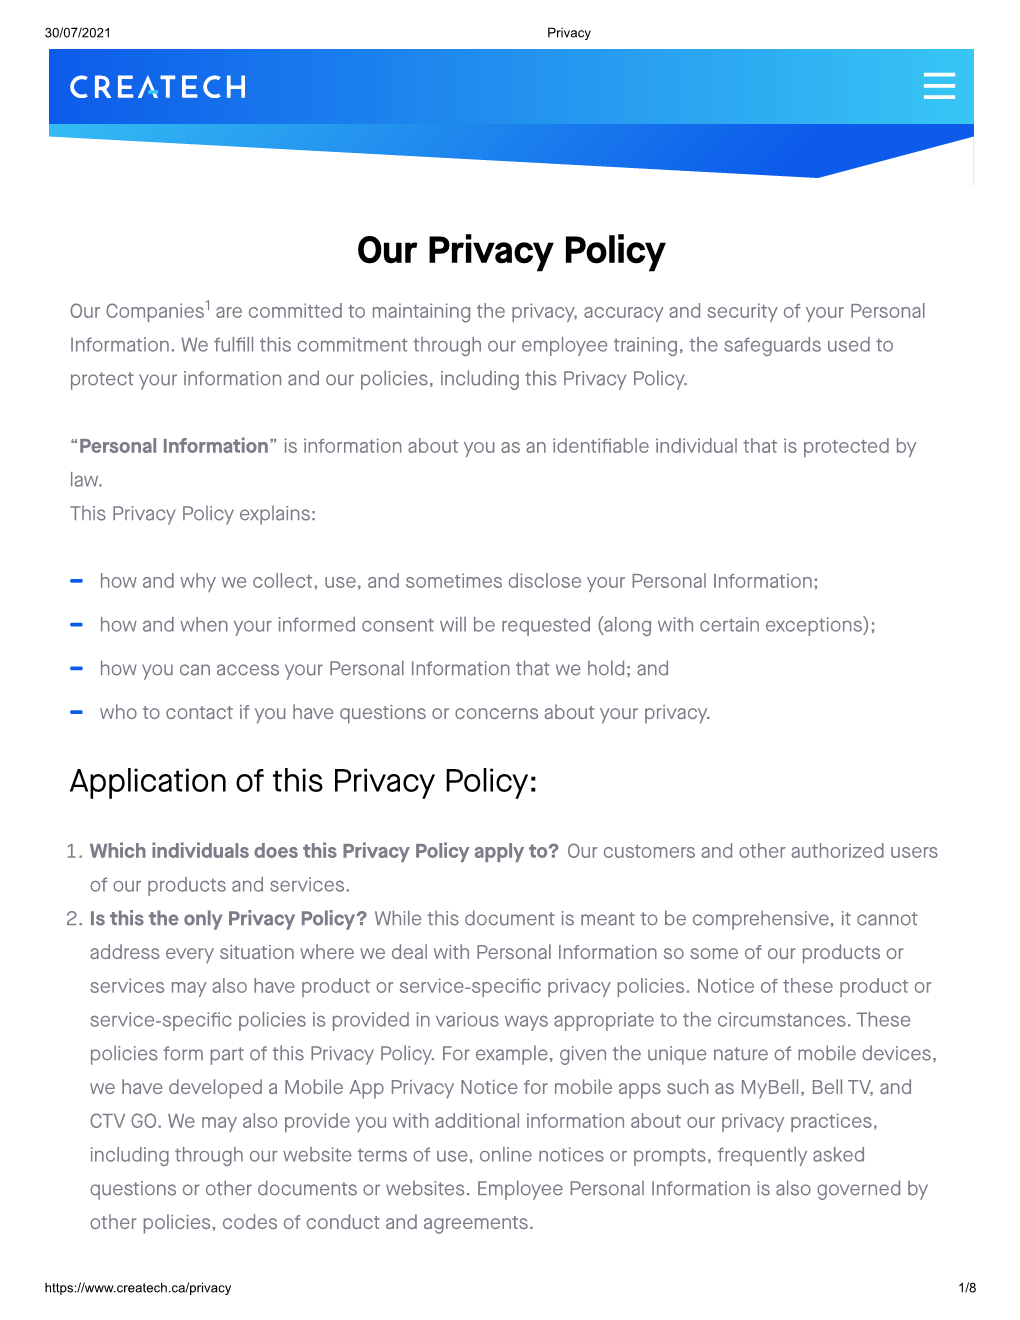 View the Previous Version of Our Privacy Policy